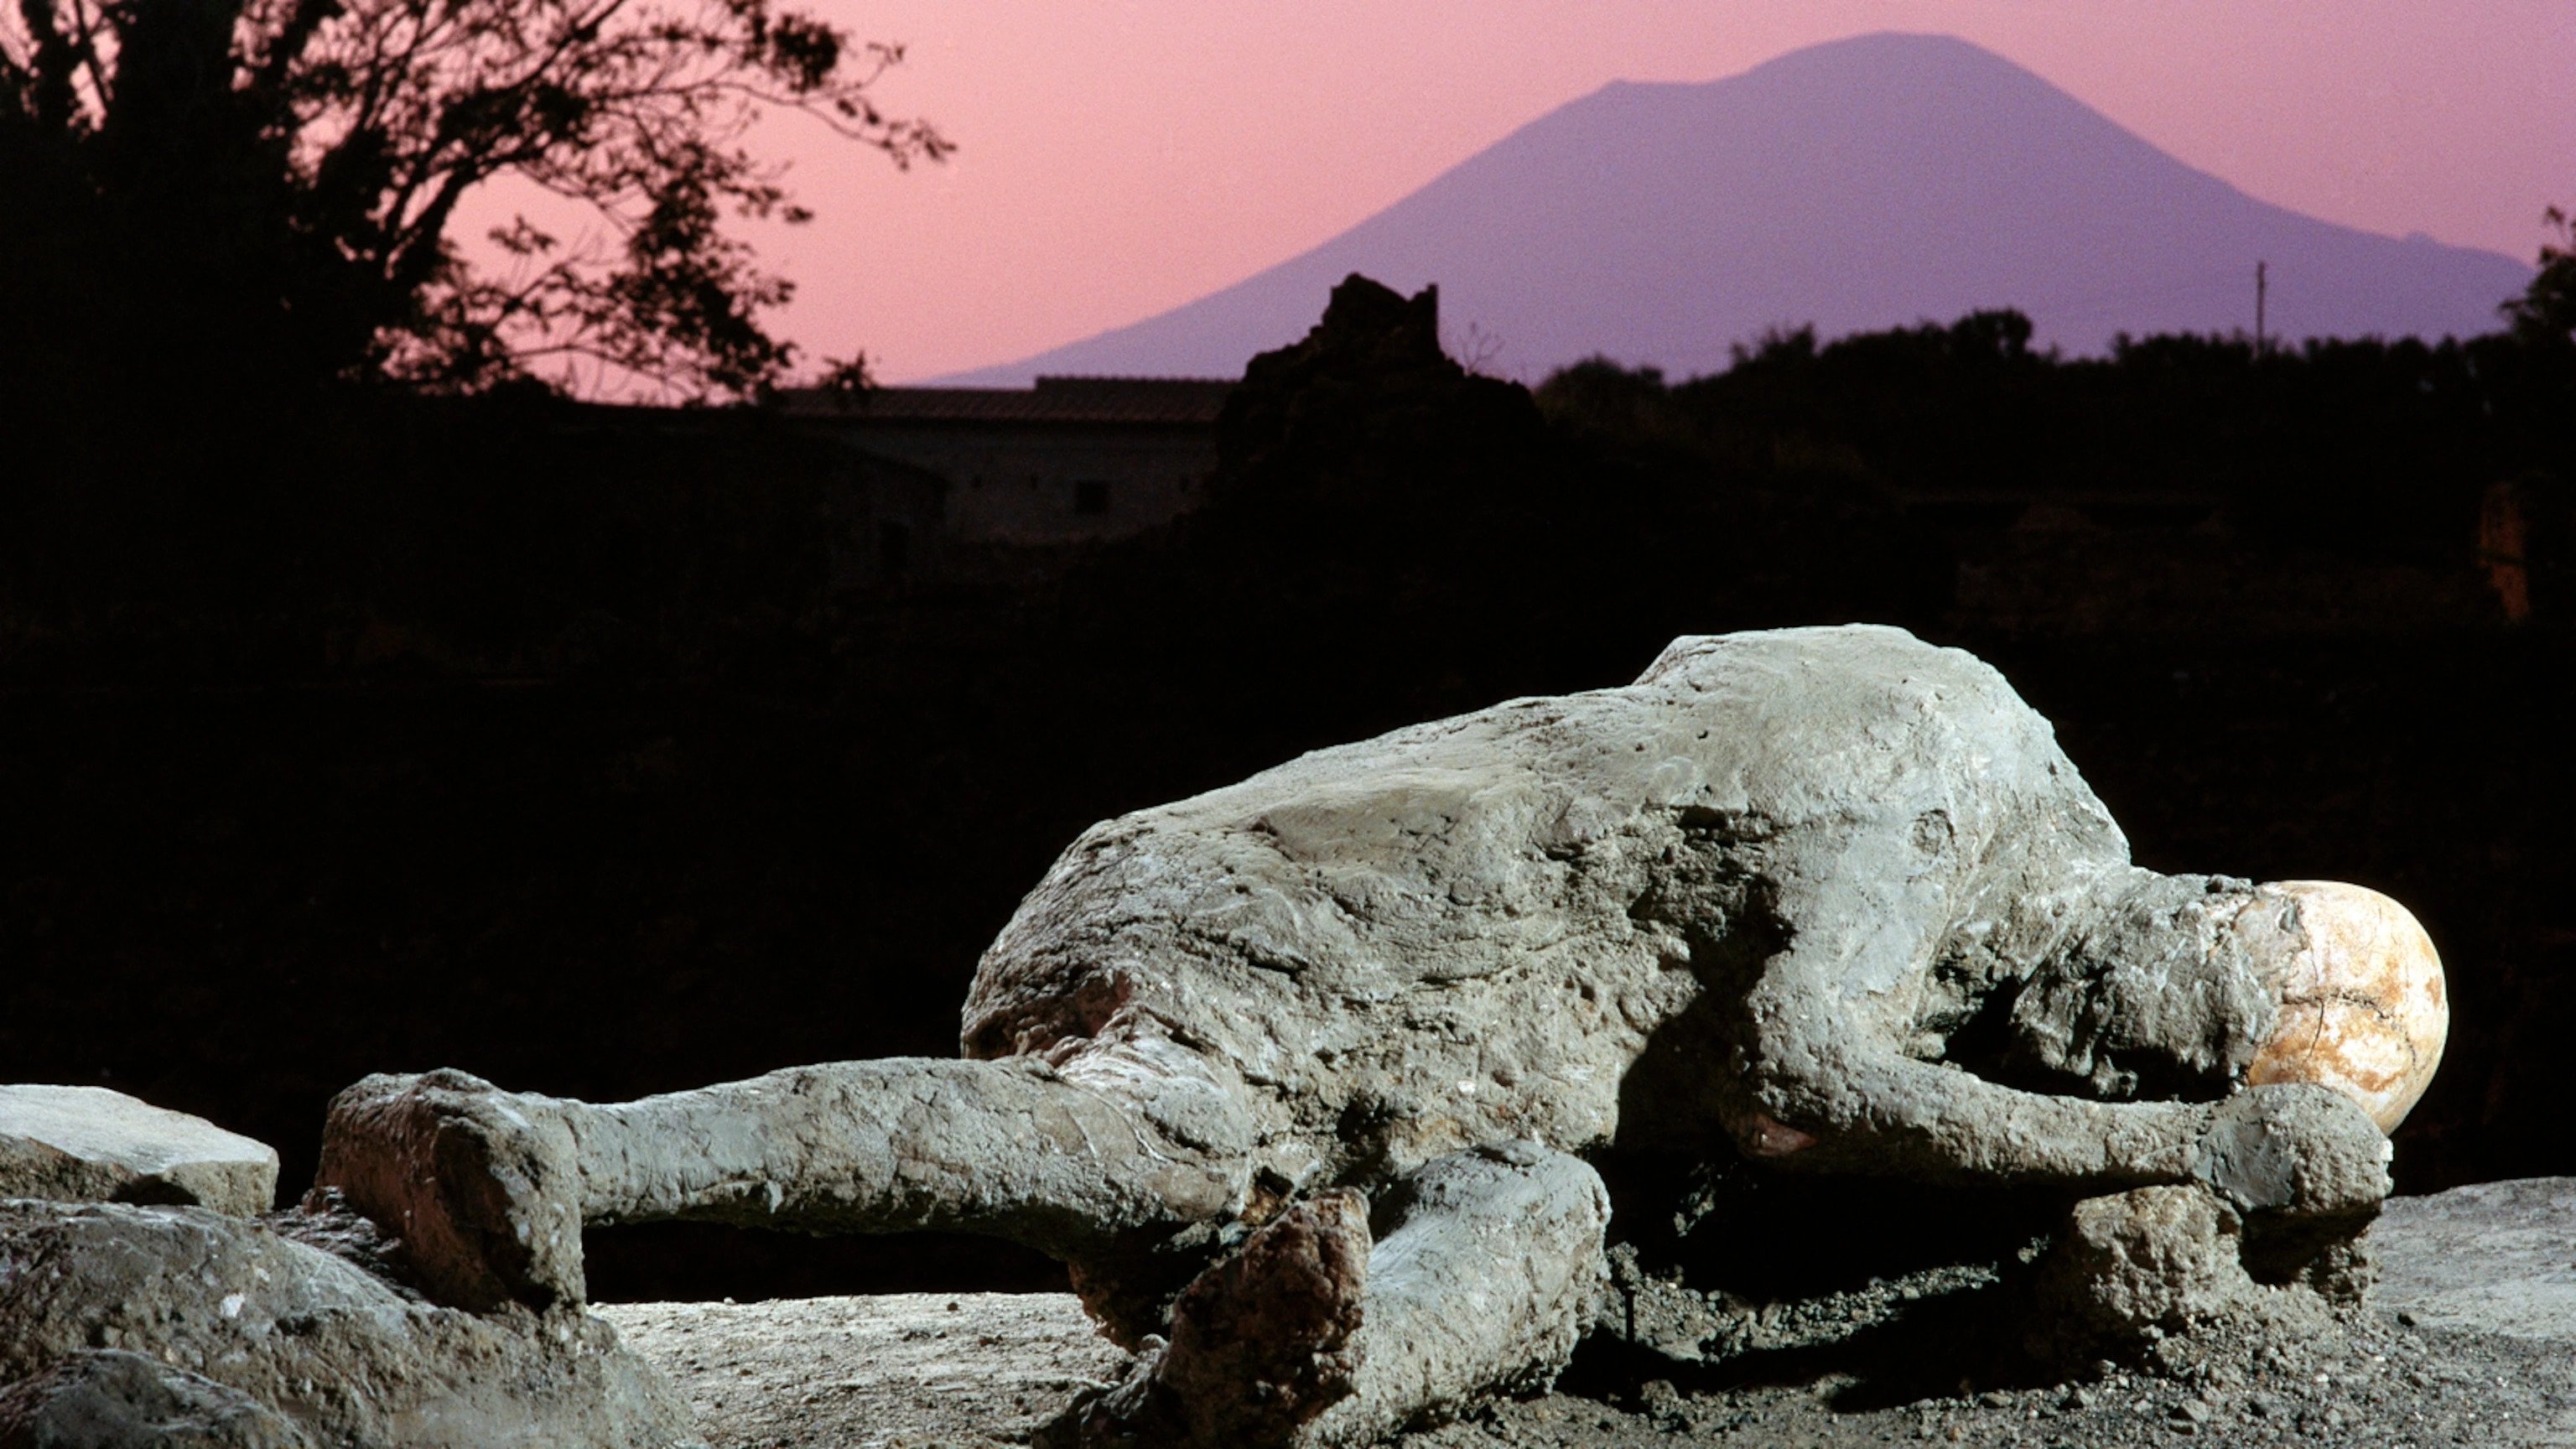 Pompeii, A City Frozen in Time